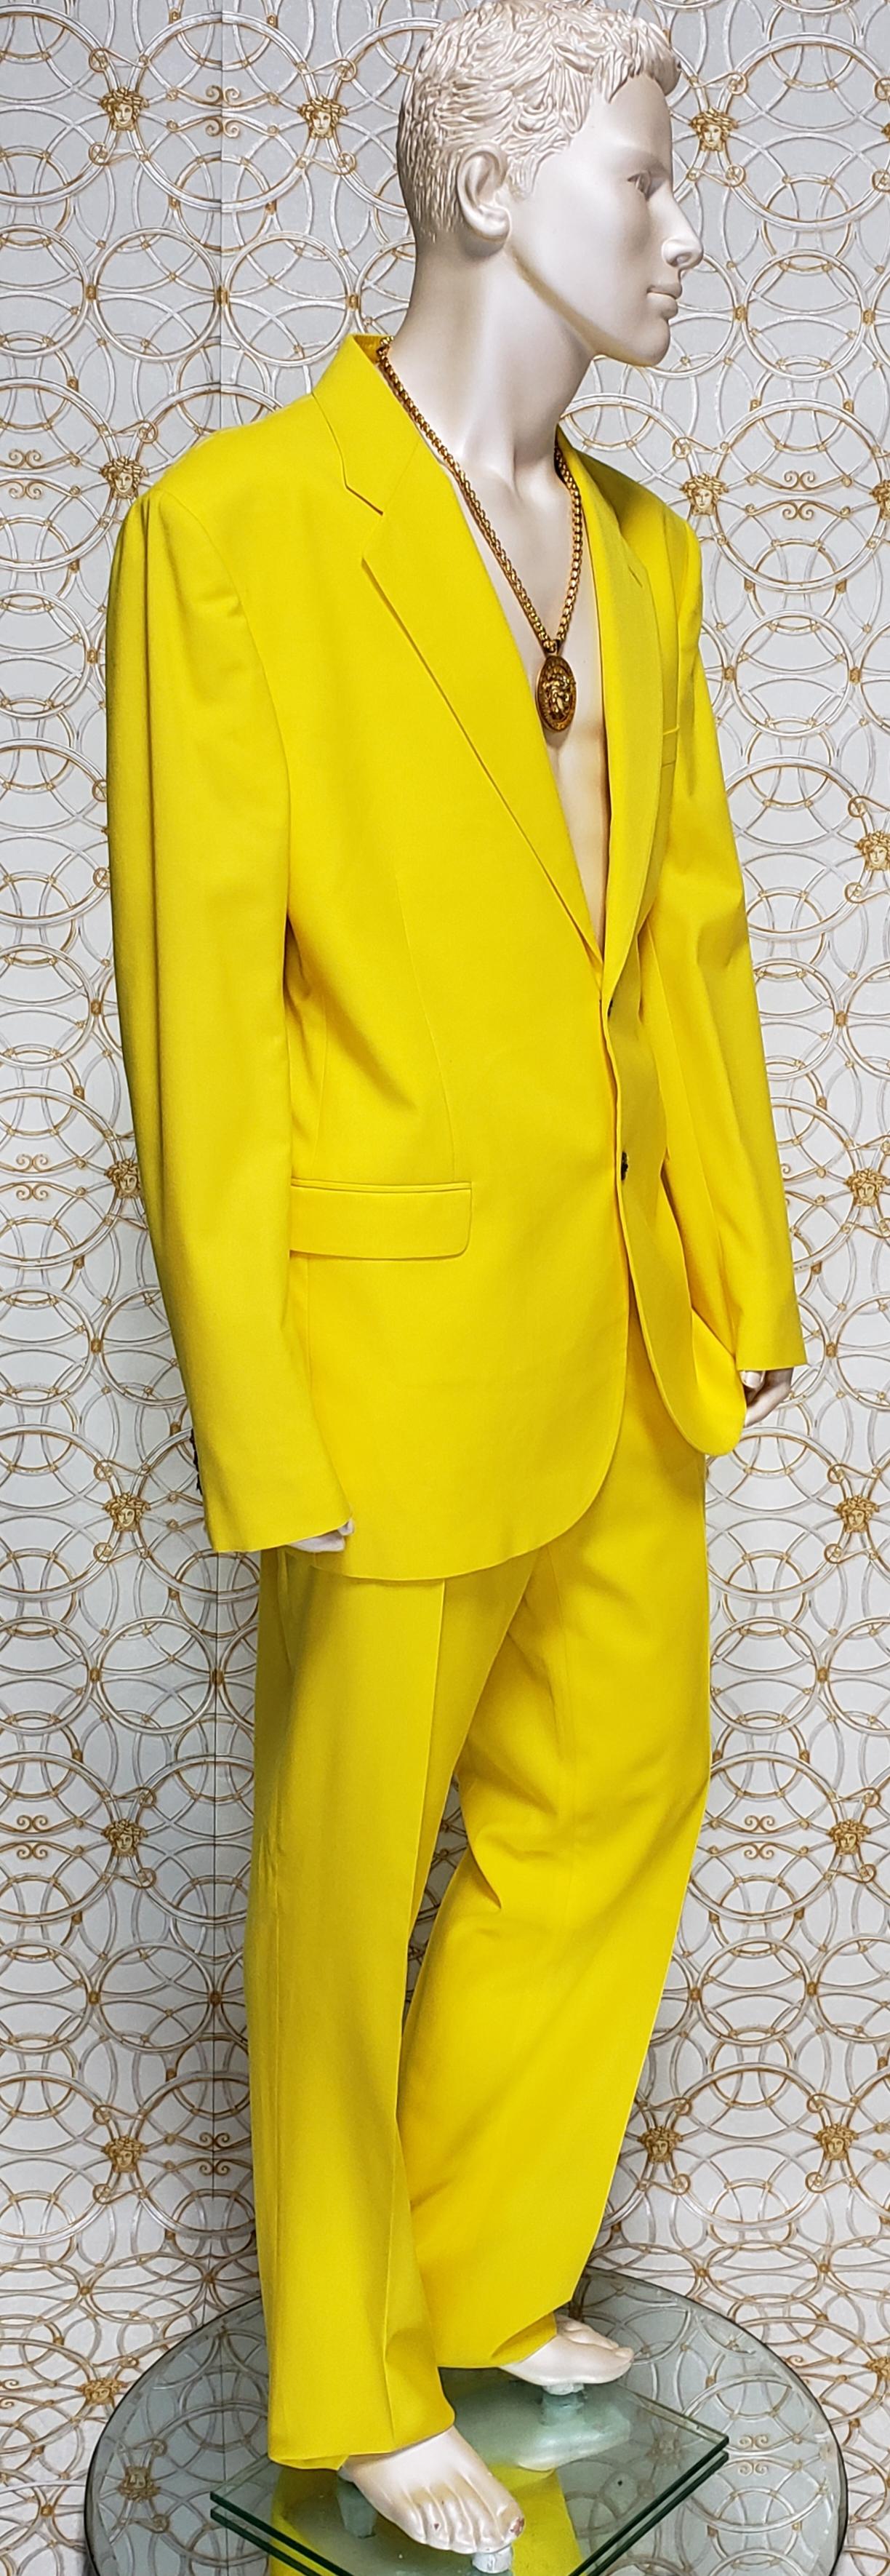 VERSACE YELLOW TAILOR MADE 2pc SUIT 58 - 48 (4XL) In New Condition For Sale In Montgomery, TX